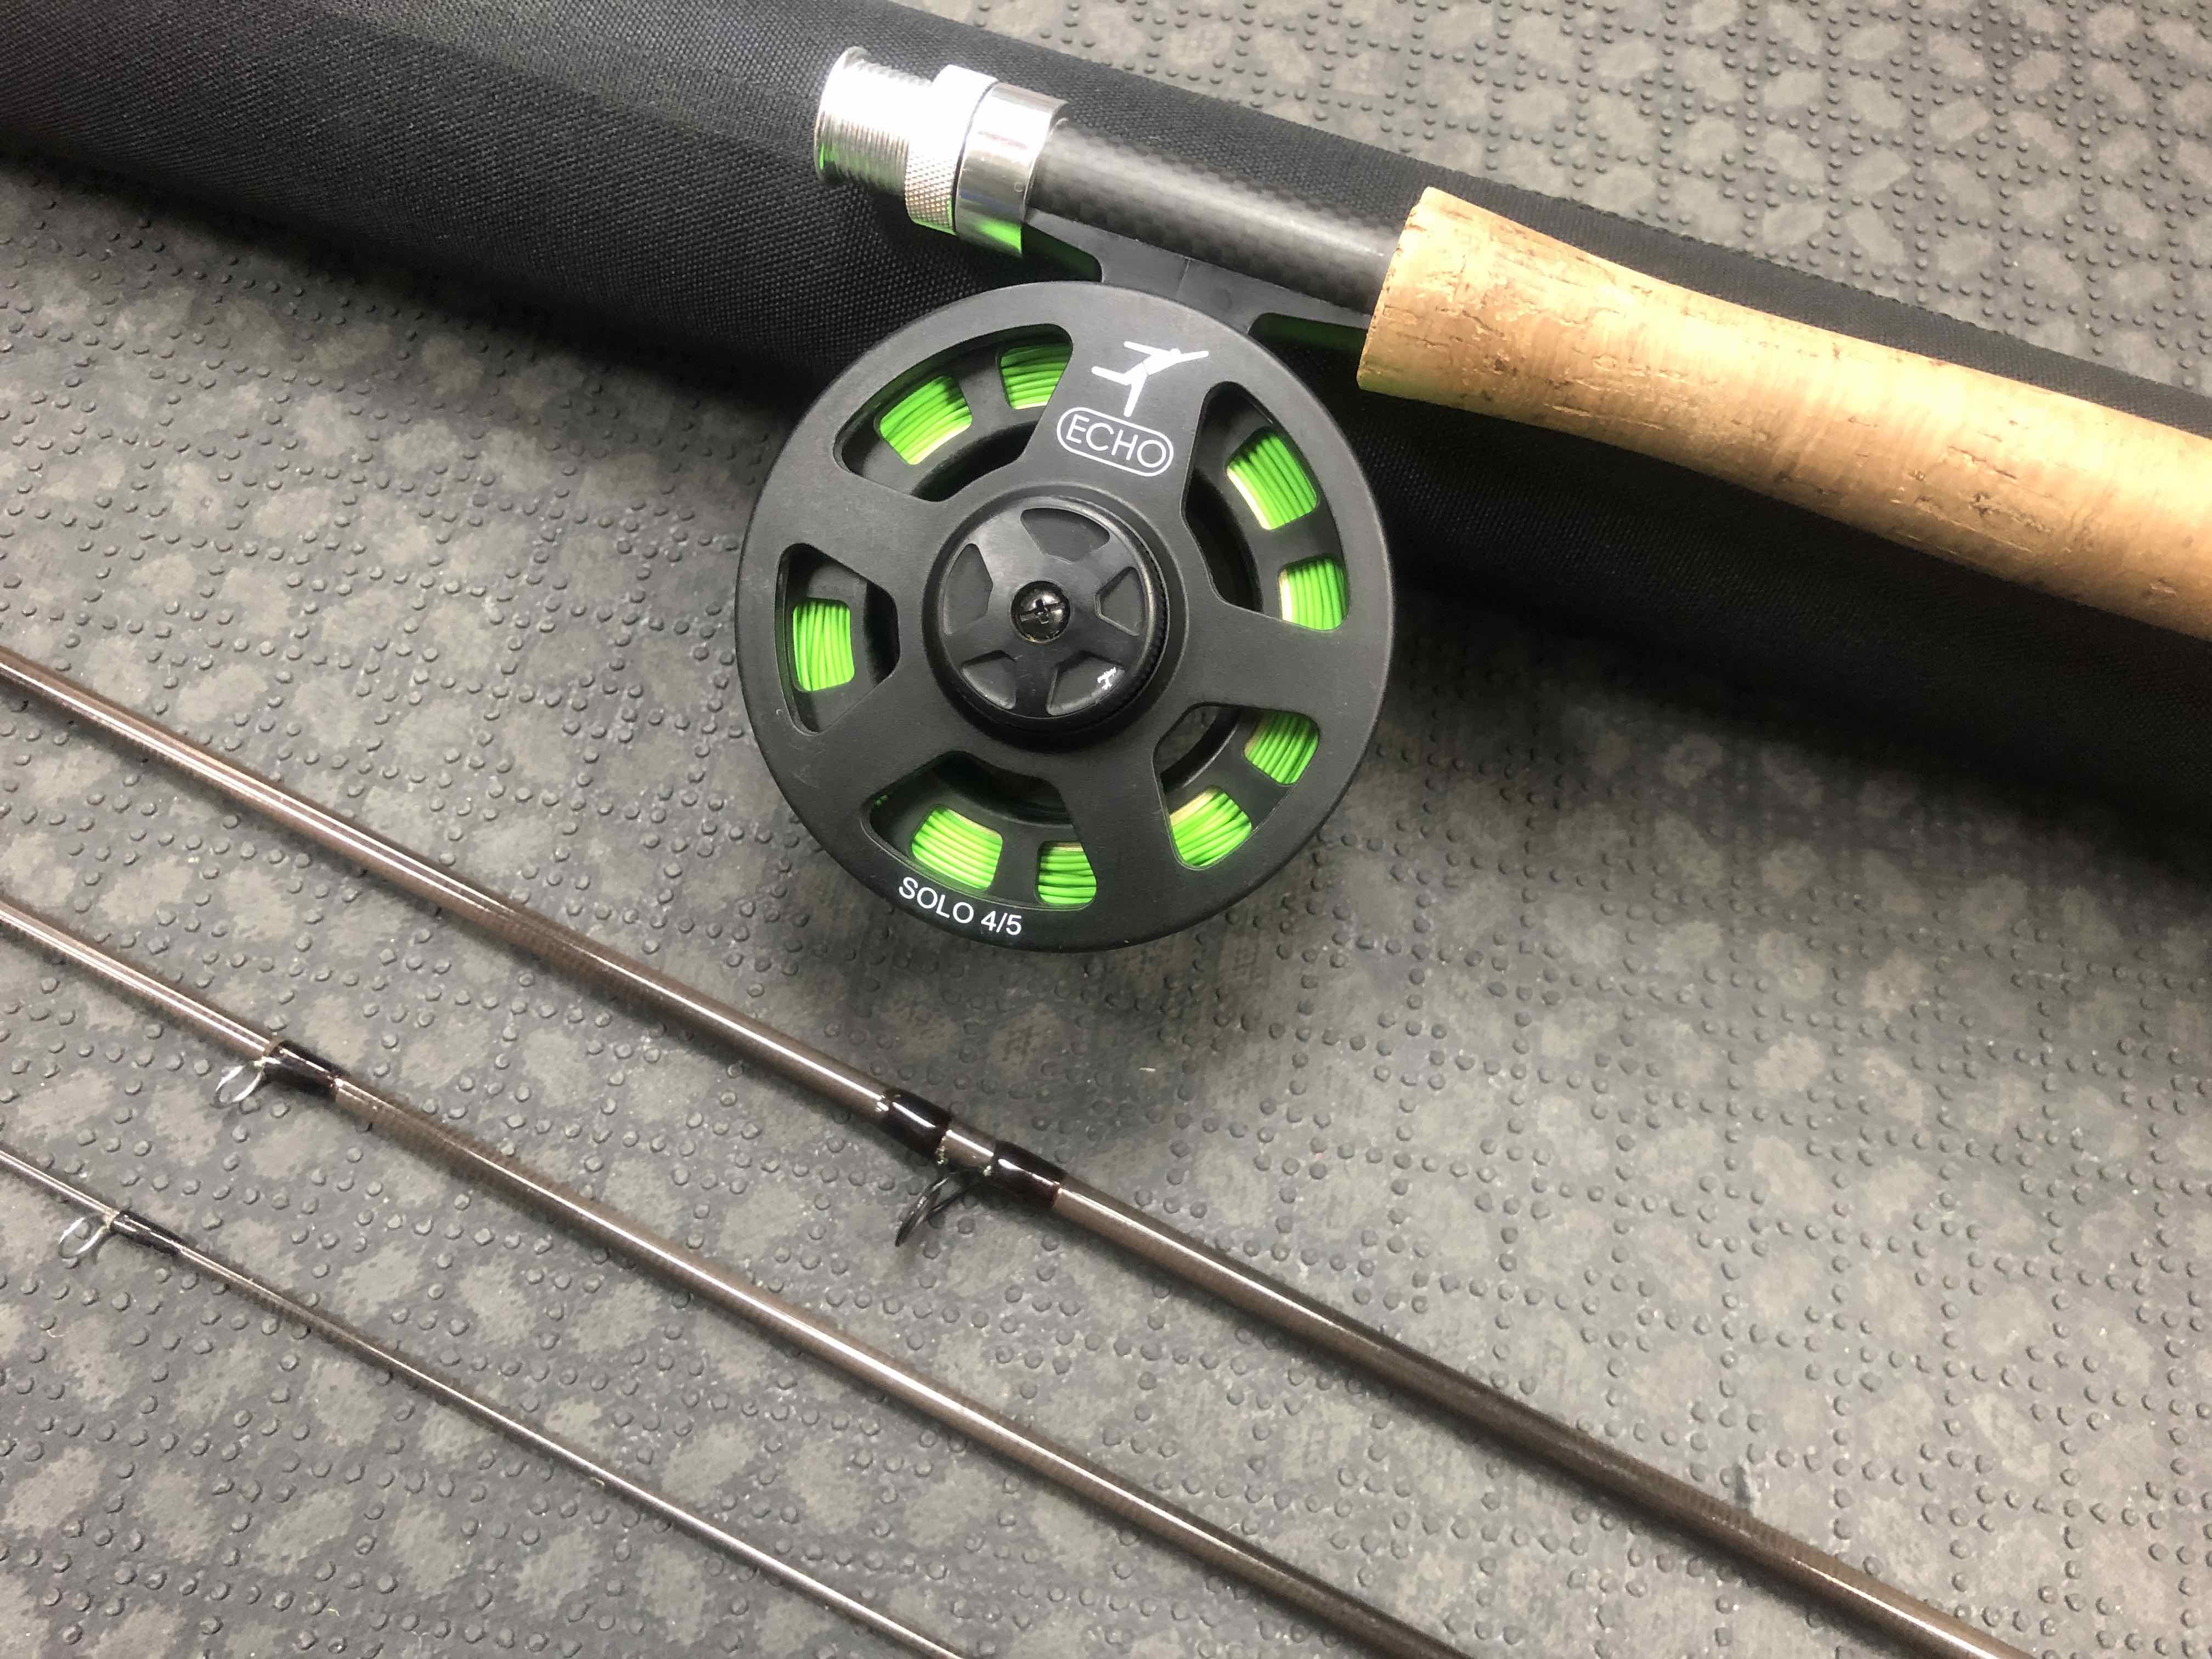 https://thefirstcast.ca/wp-content/uploads/2019/10/Echo-Solo-5904-9-foot-5-Weight-4-Piece-Fly-Rod-and-Reel-Combo-CC.jpg